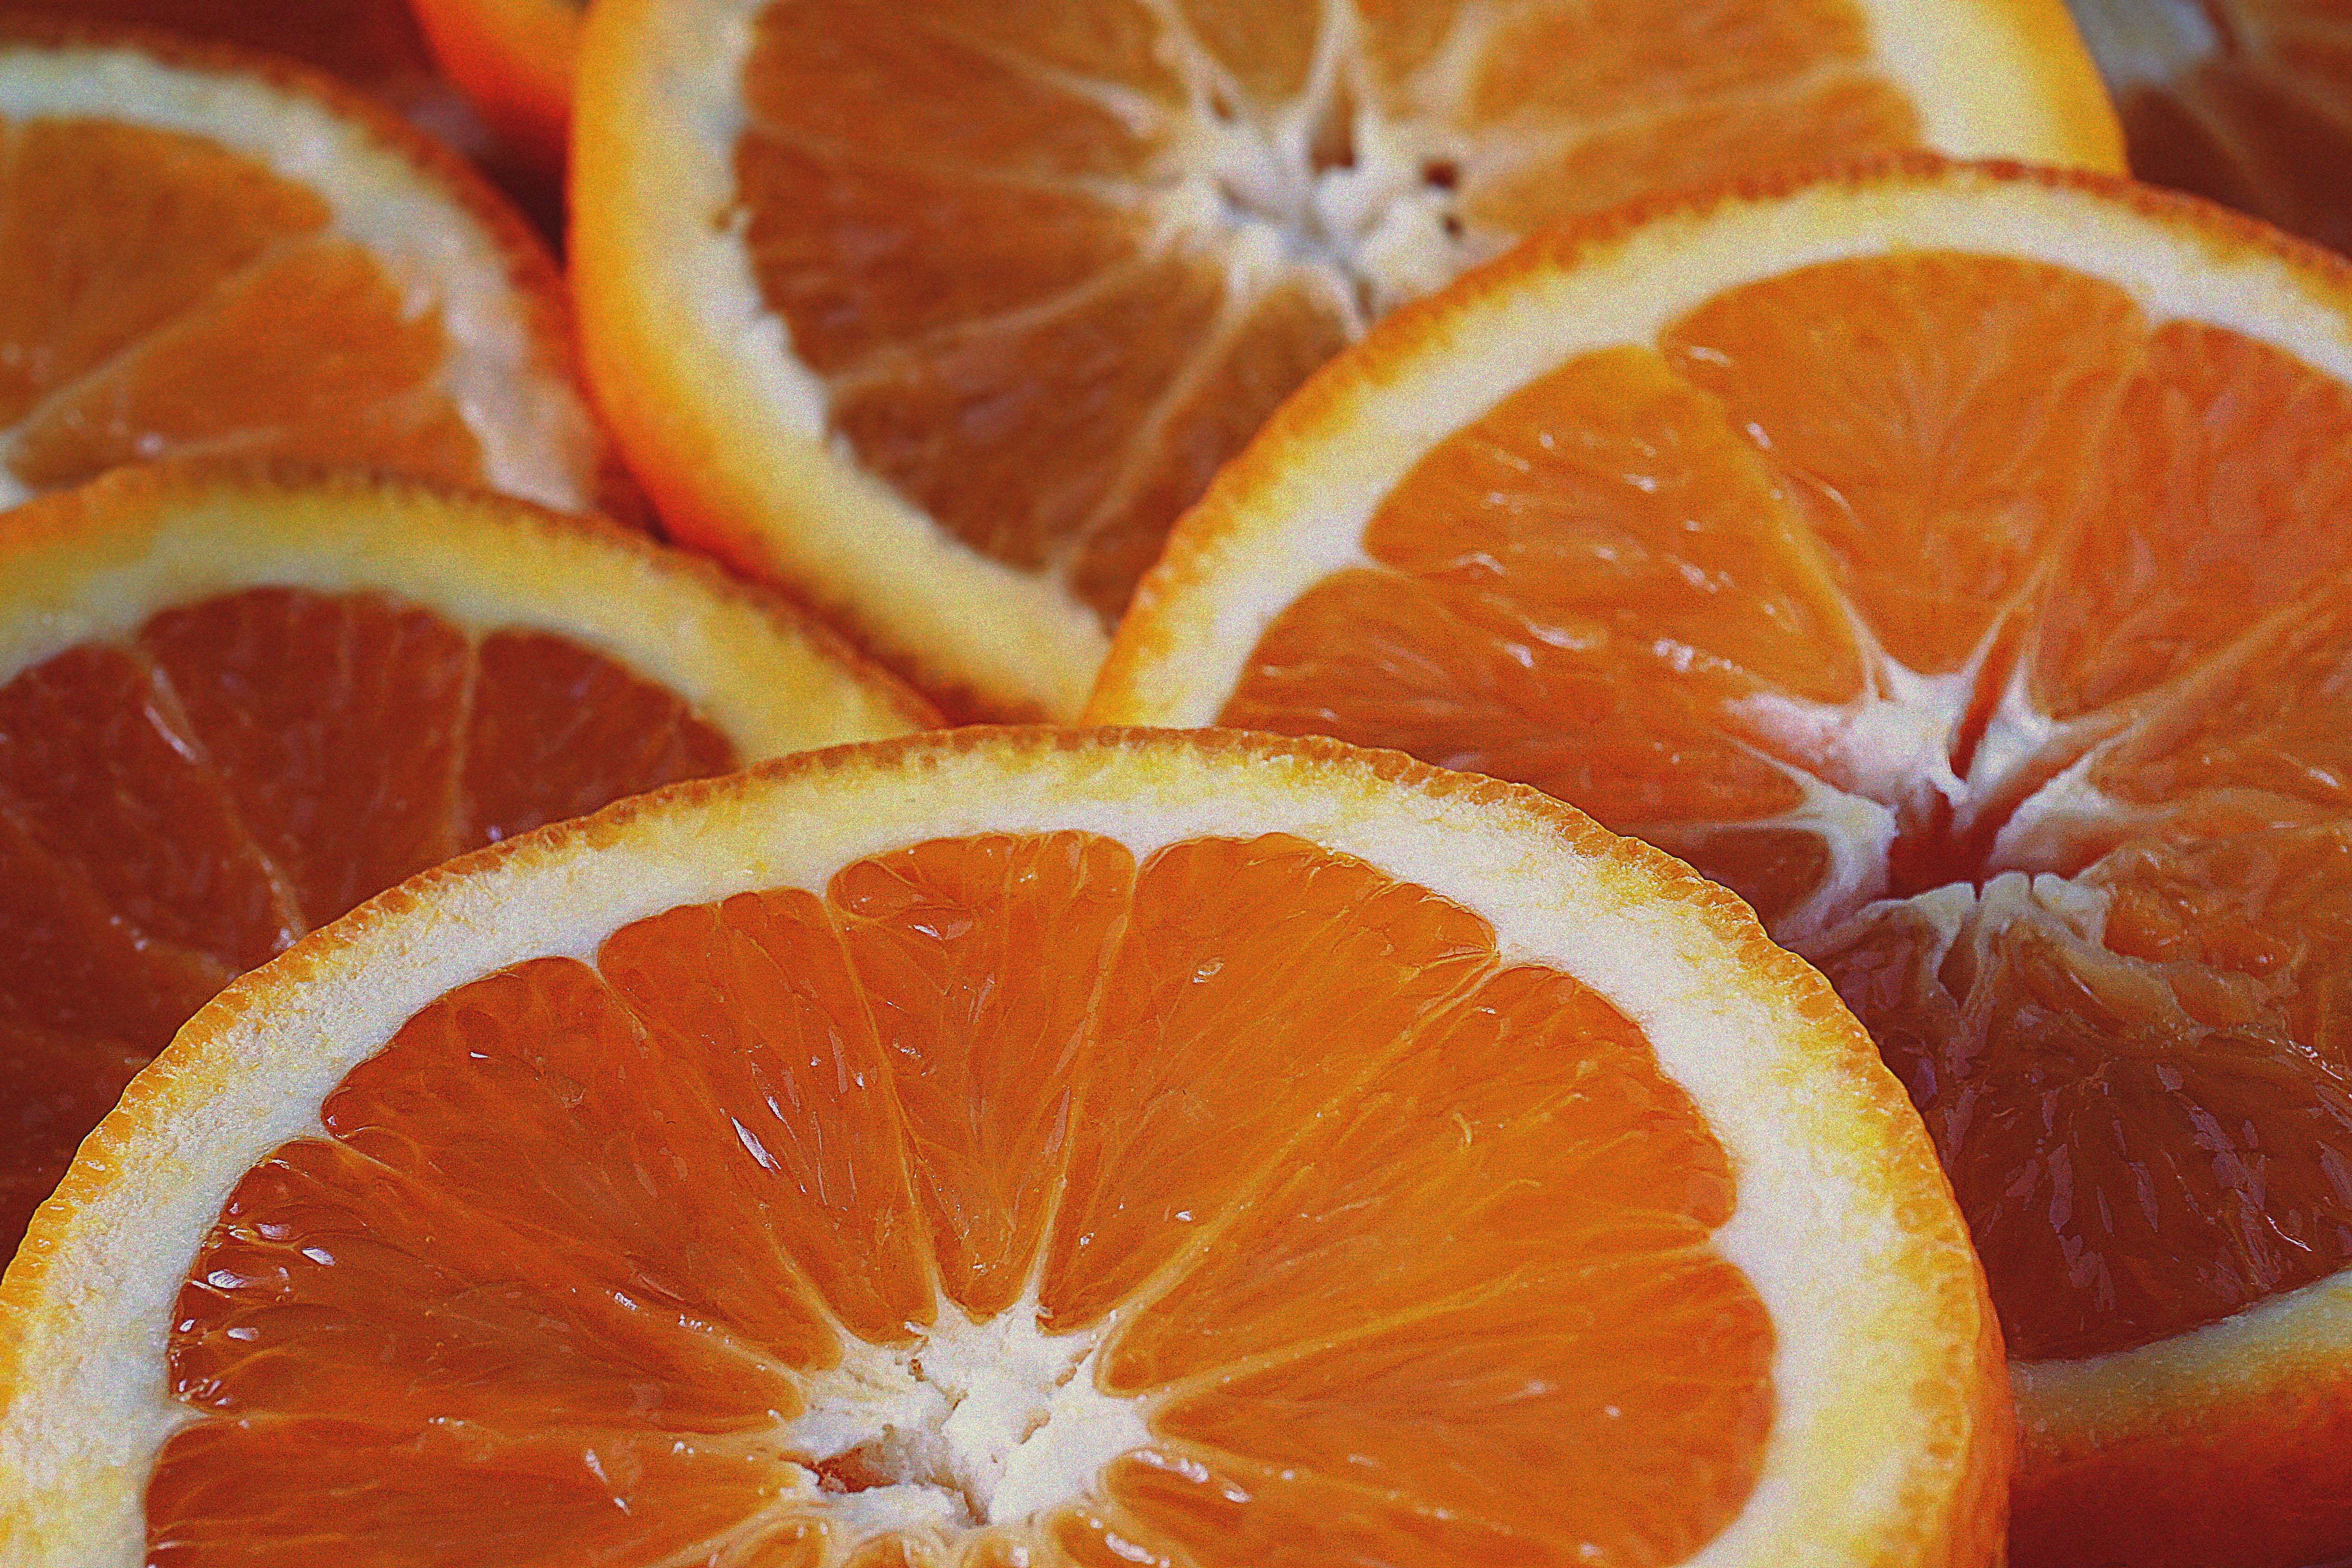 How To Use Vitamin C For Best Results